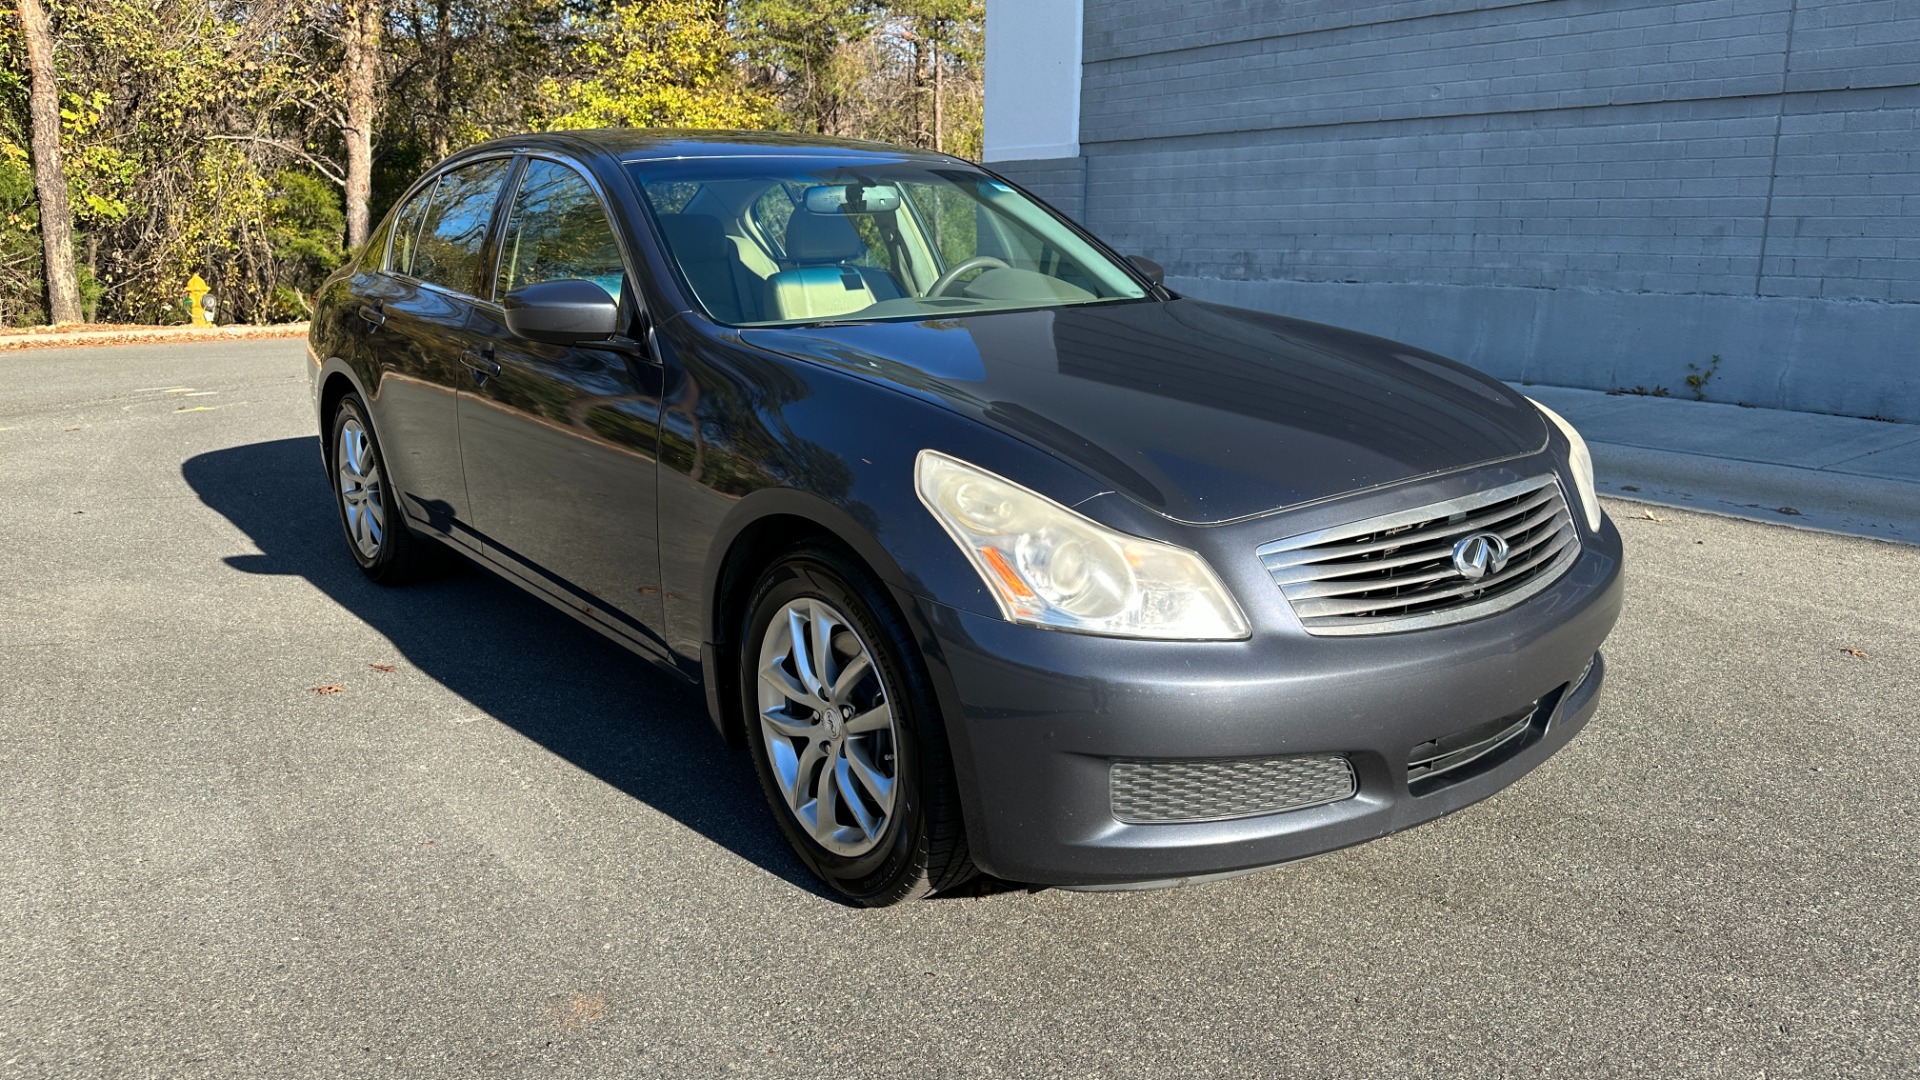 Used 2009 INFINITI G37 Sedan X / AWD / PREMIUM PACKAGE / BOSE / LEATHER / 3.7L V6 / WOOD TRIM for sale $6,200 at Formula Imports in Charlotte NC 28227 5